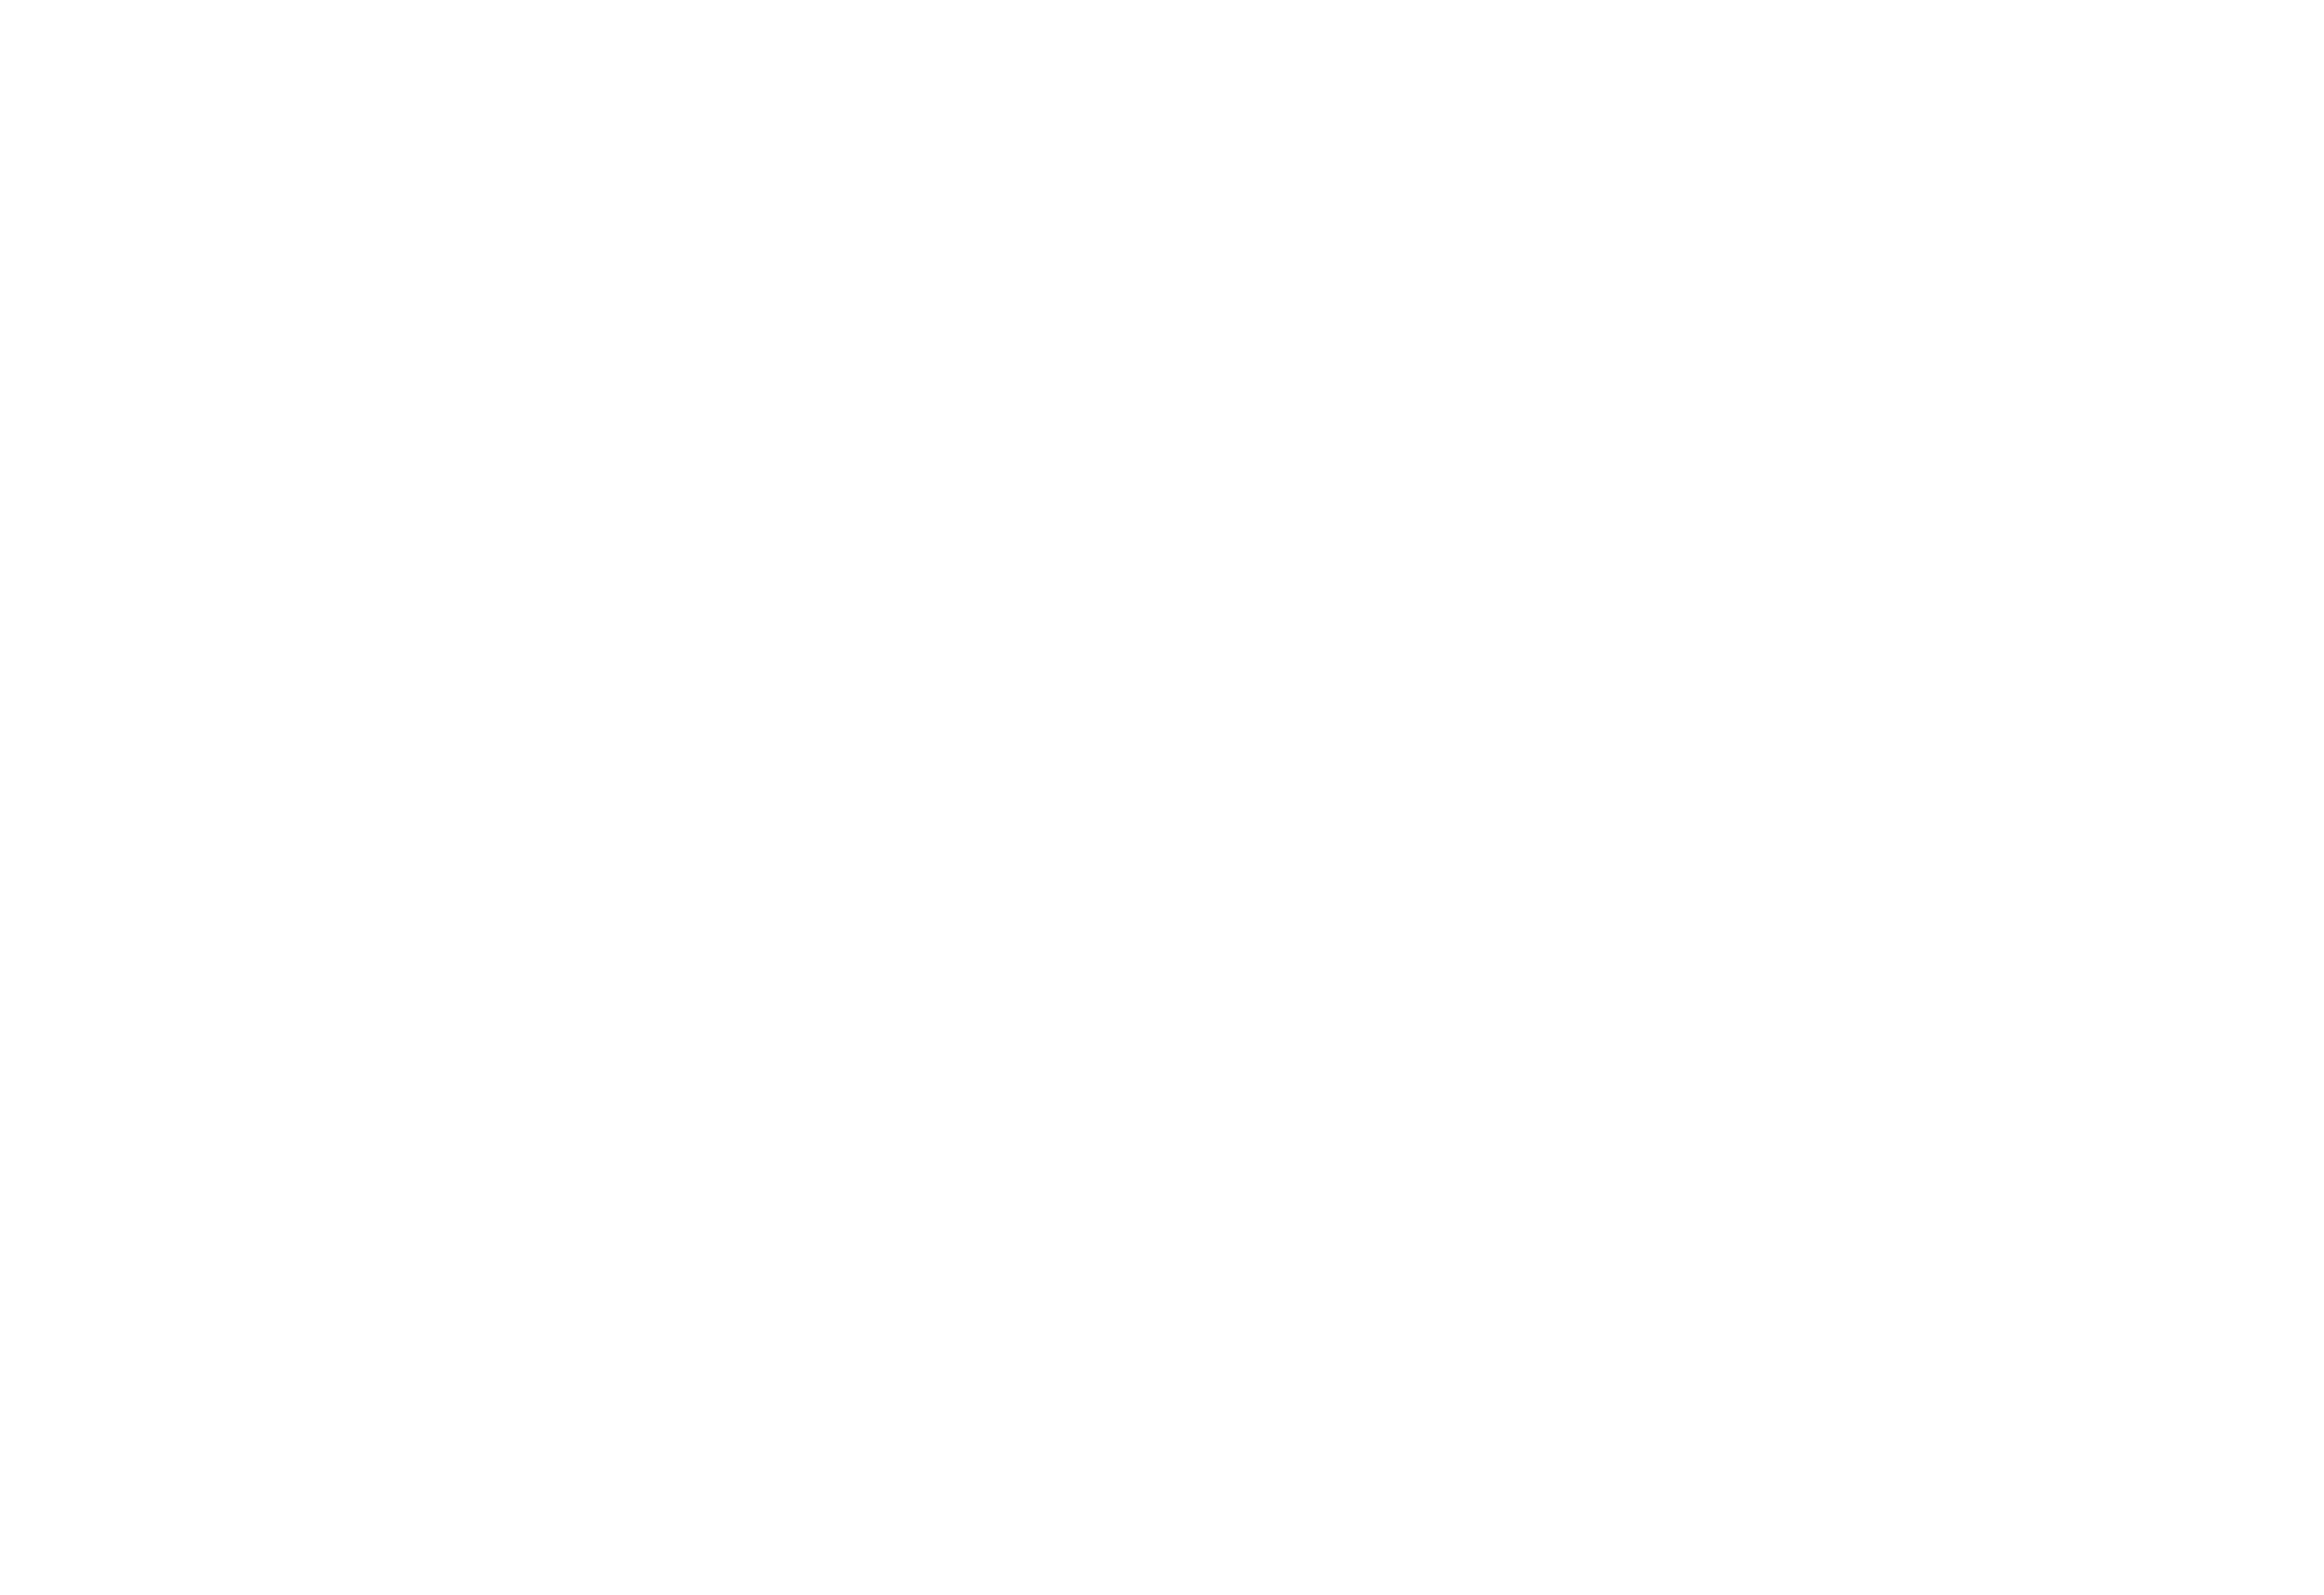 Happy Valentine S Day Png Transparent Clip Art Image Gallery Yopriceville High Quality Images And Transparent Png Free Clipart